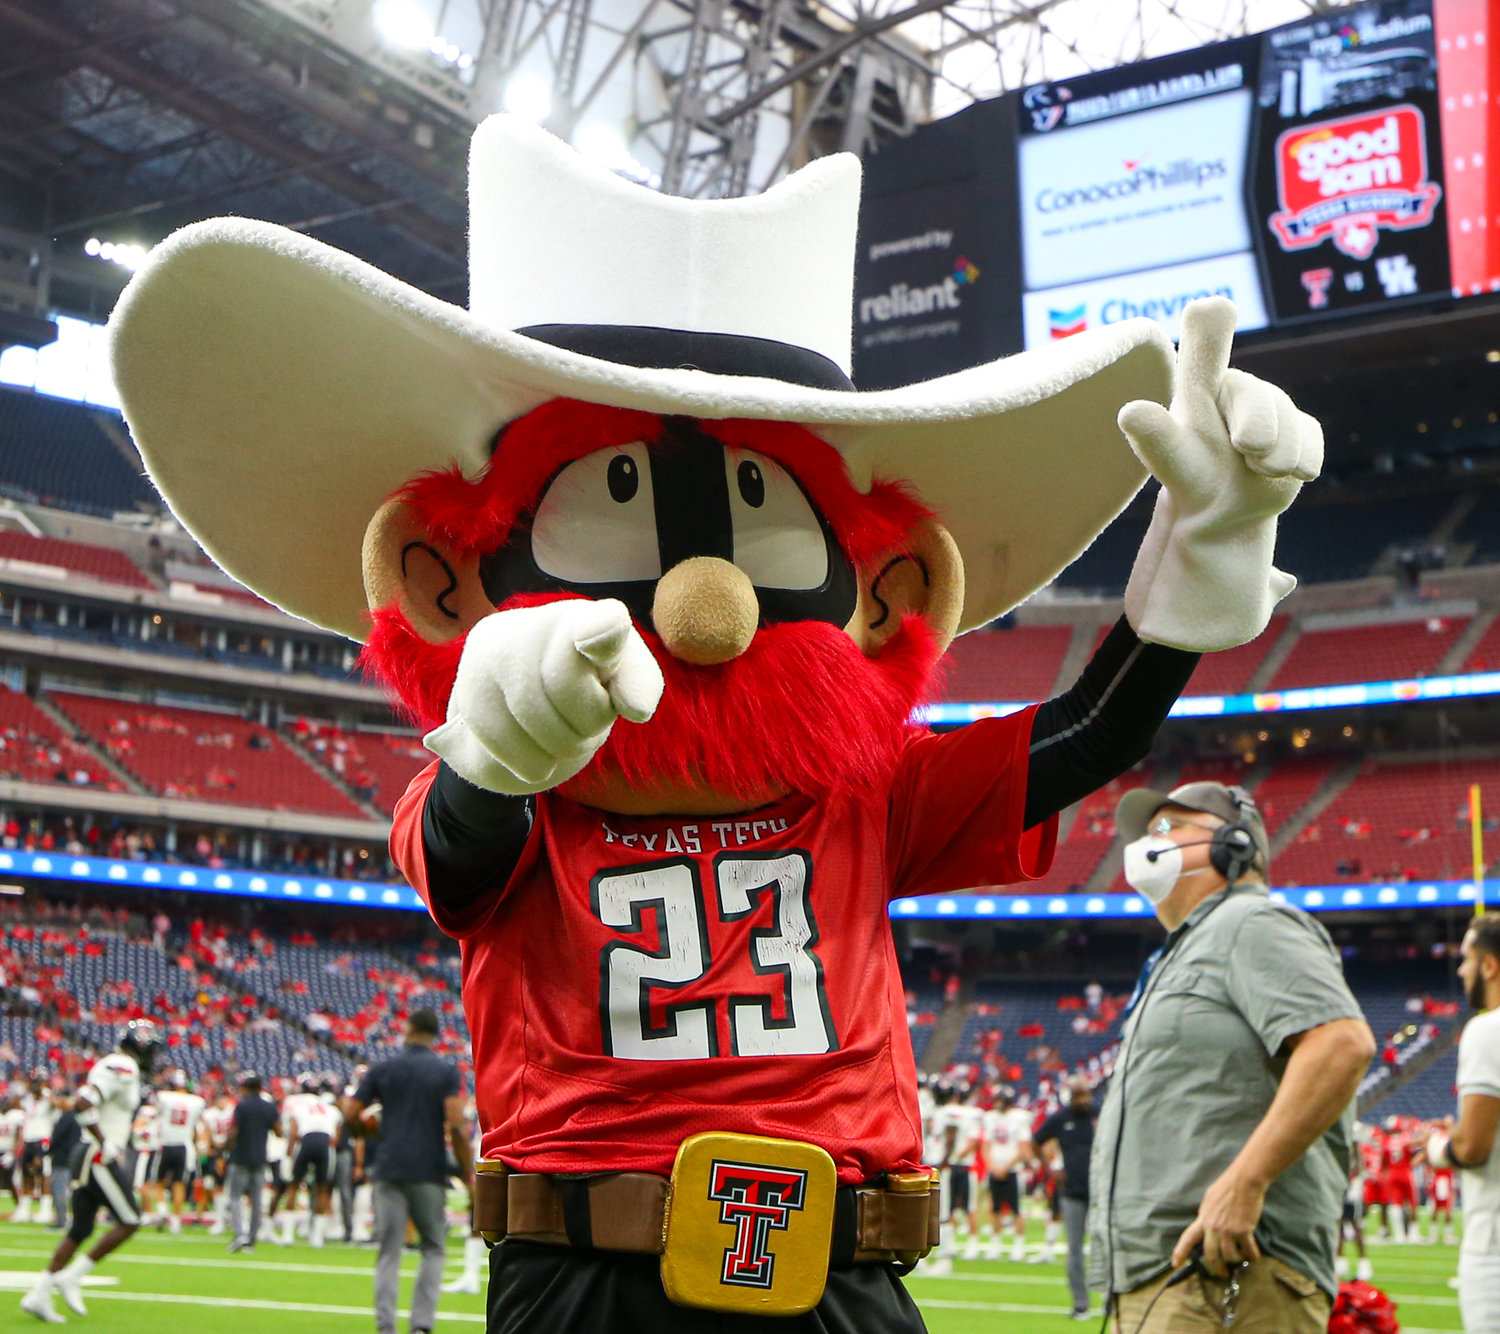 The Texas Tech Red Raiders mascot Raider Red before the start of an NCAA football game between Houston and Texas Tech on September 4, 2021 in Houston, Texas.